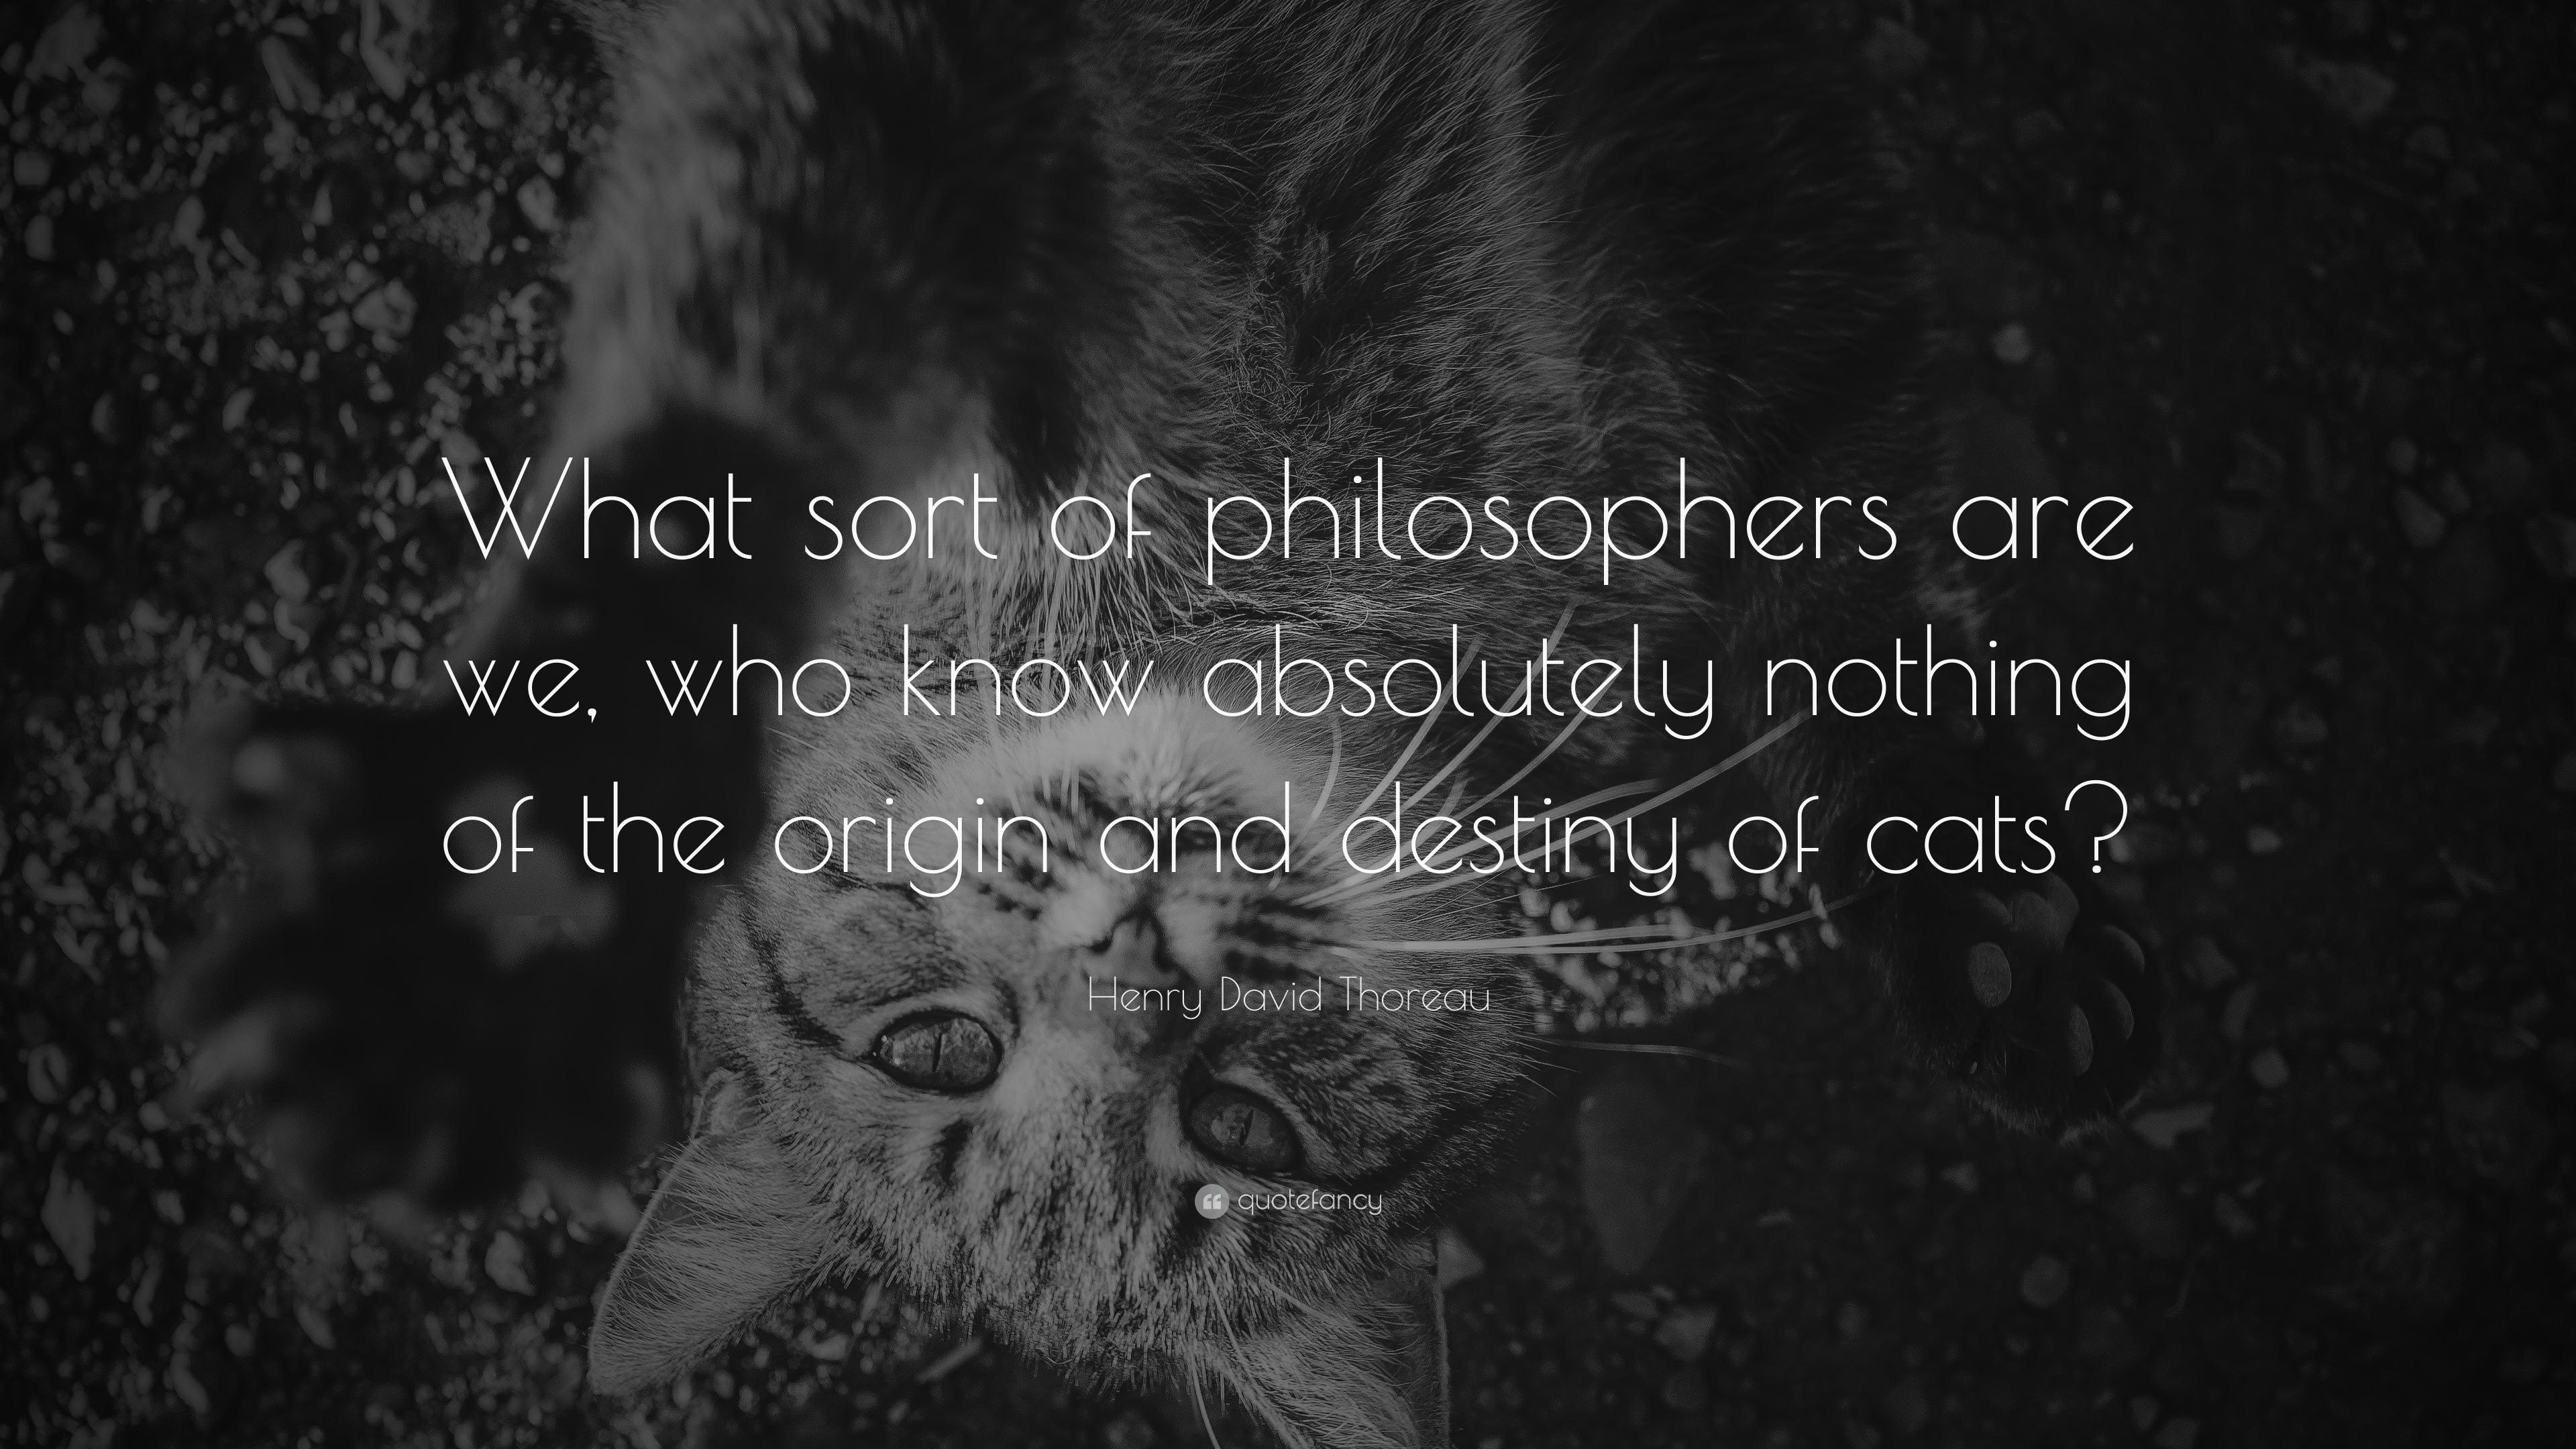 Henry David Thoreau Quote: “What sort of philosophers are we, who